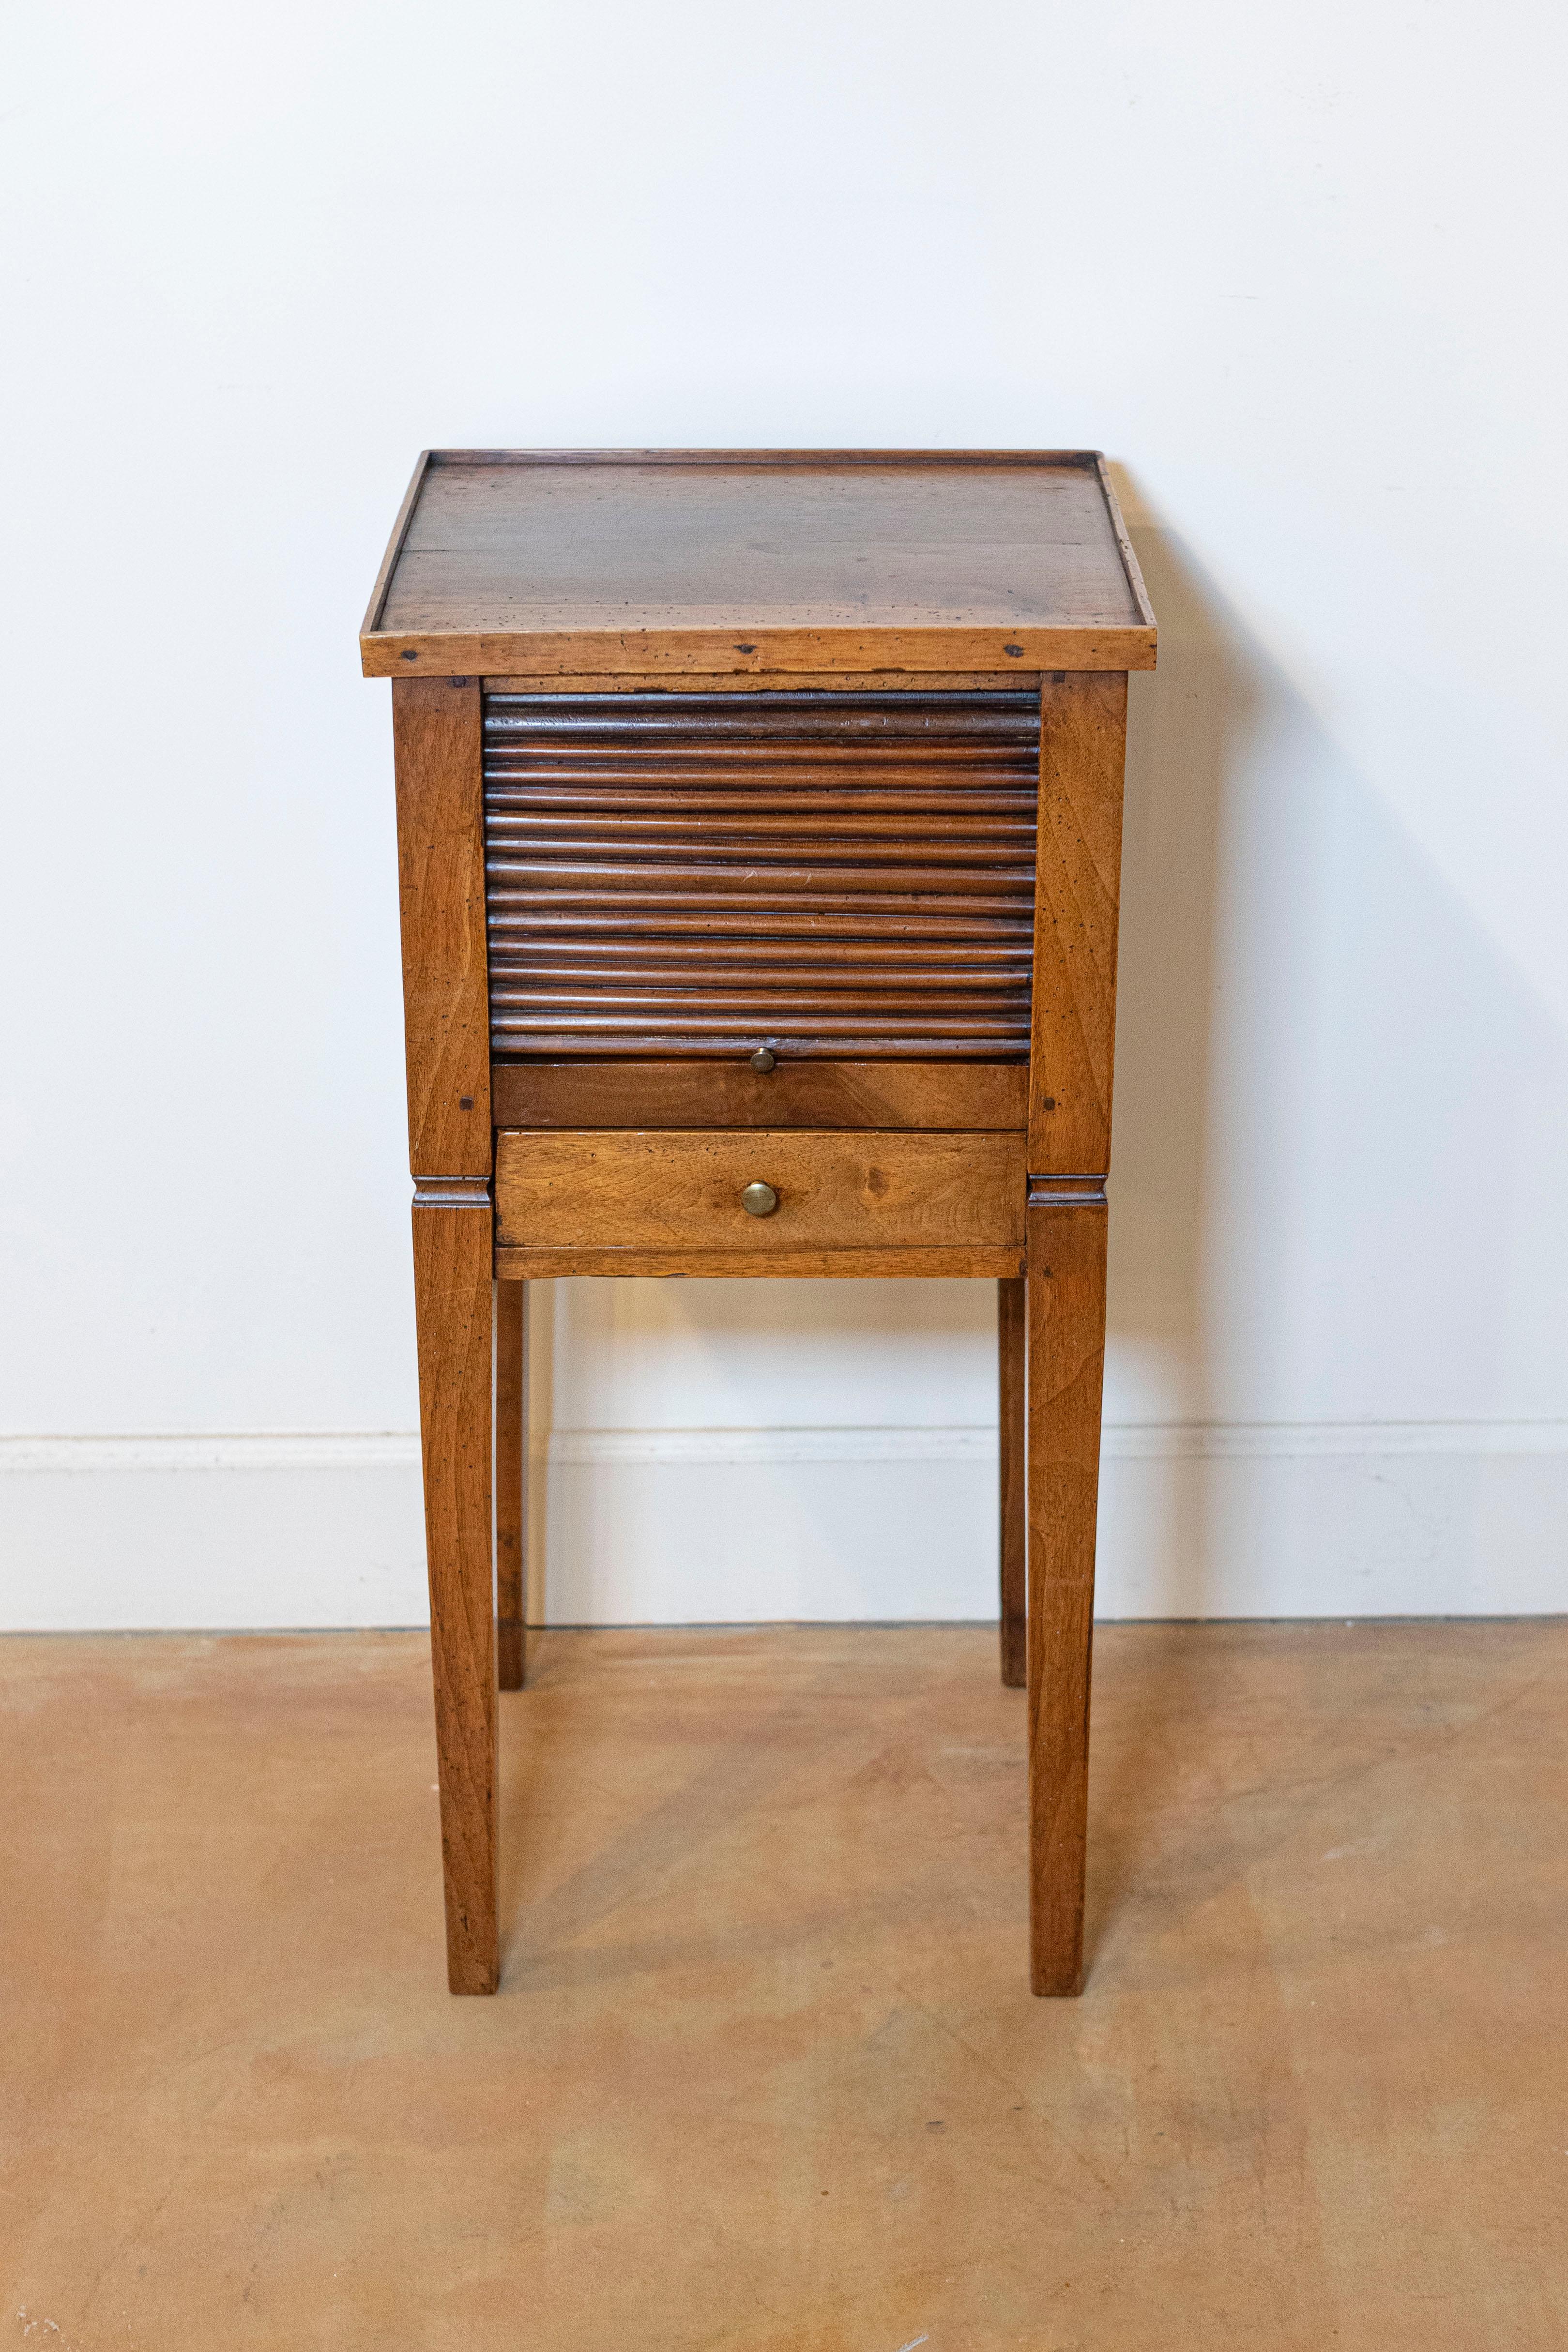 A French Louis XVI style walnut bedside table circa 1890 with tambour door, single drawer and tapering legs. Step back in time with this elegant French Louis XVI style walnut bedside table, dating back to circa 1890. Known as a 